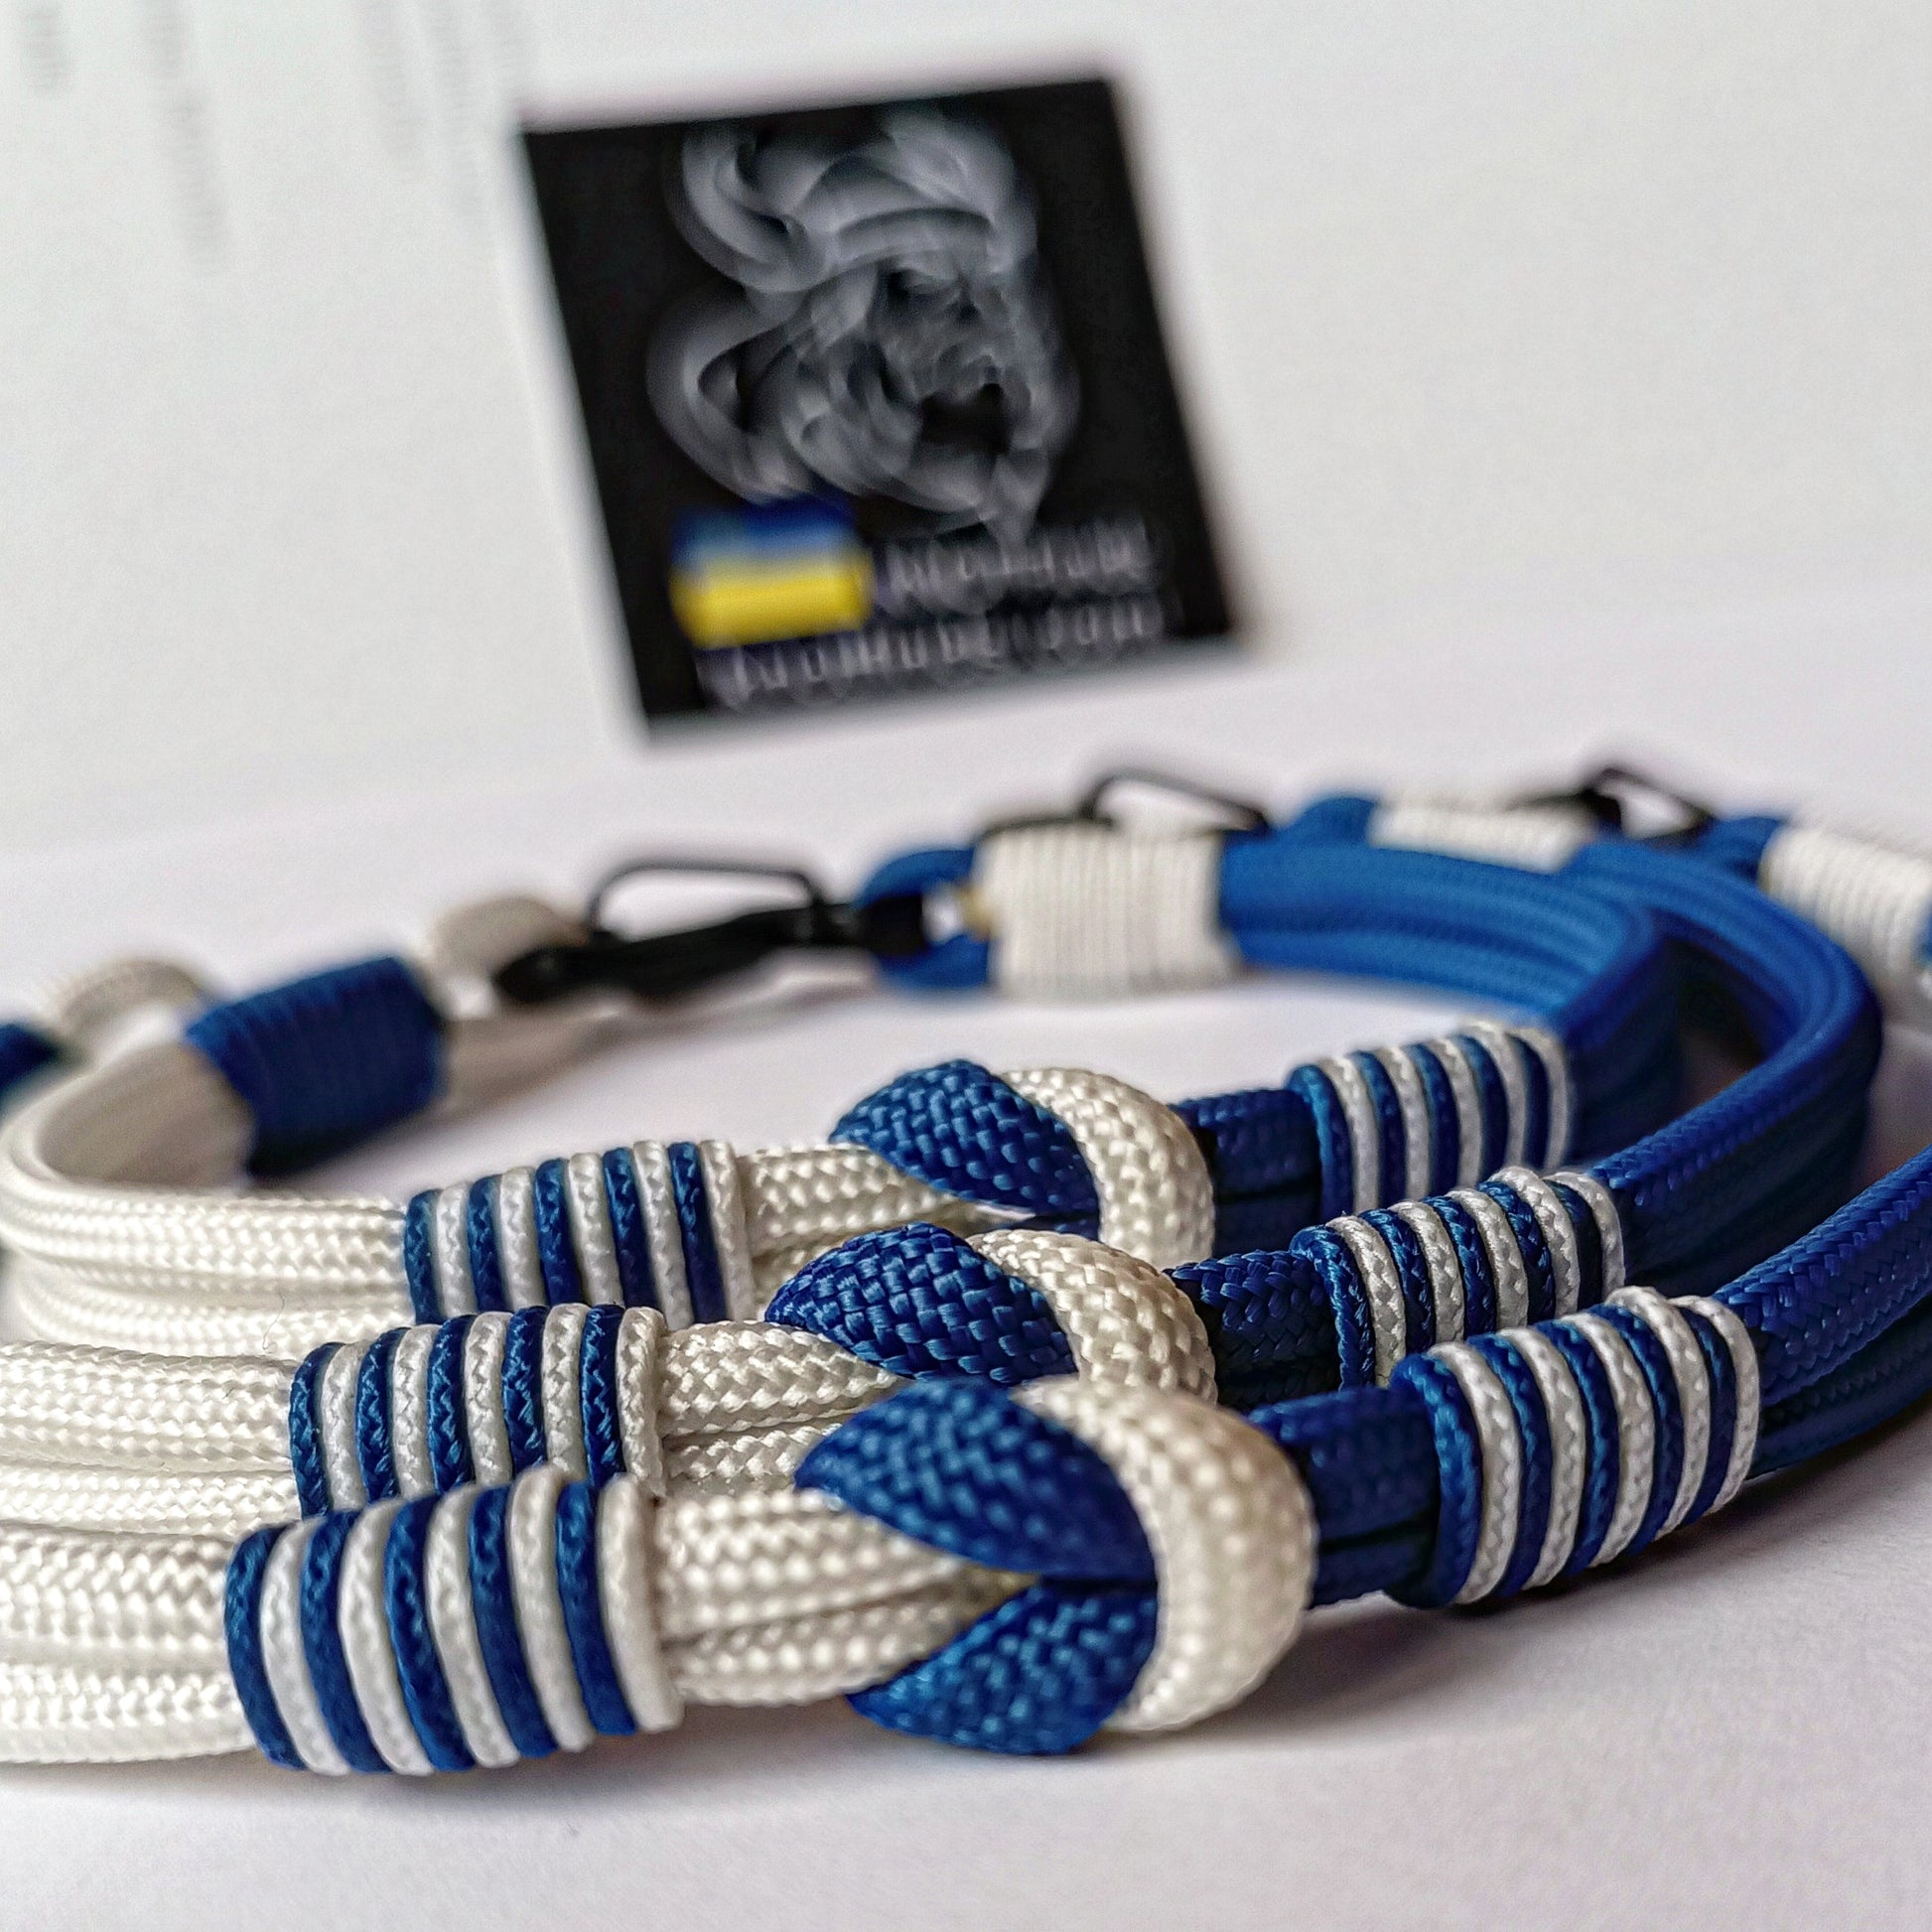 Israel solidarity bracelet. Thin paracord bracelet with a carbine